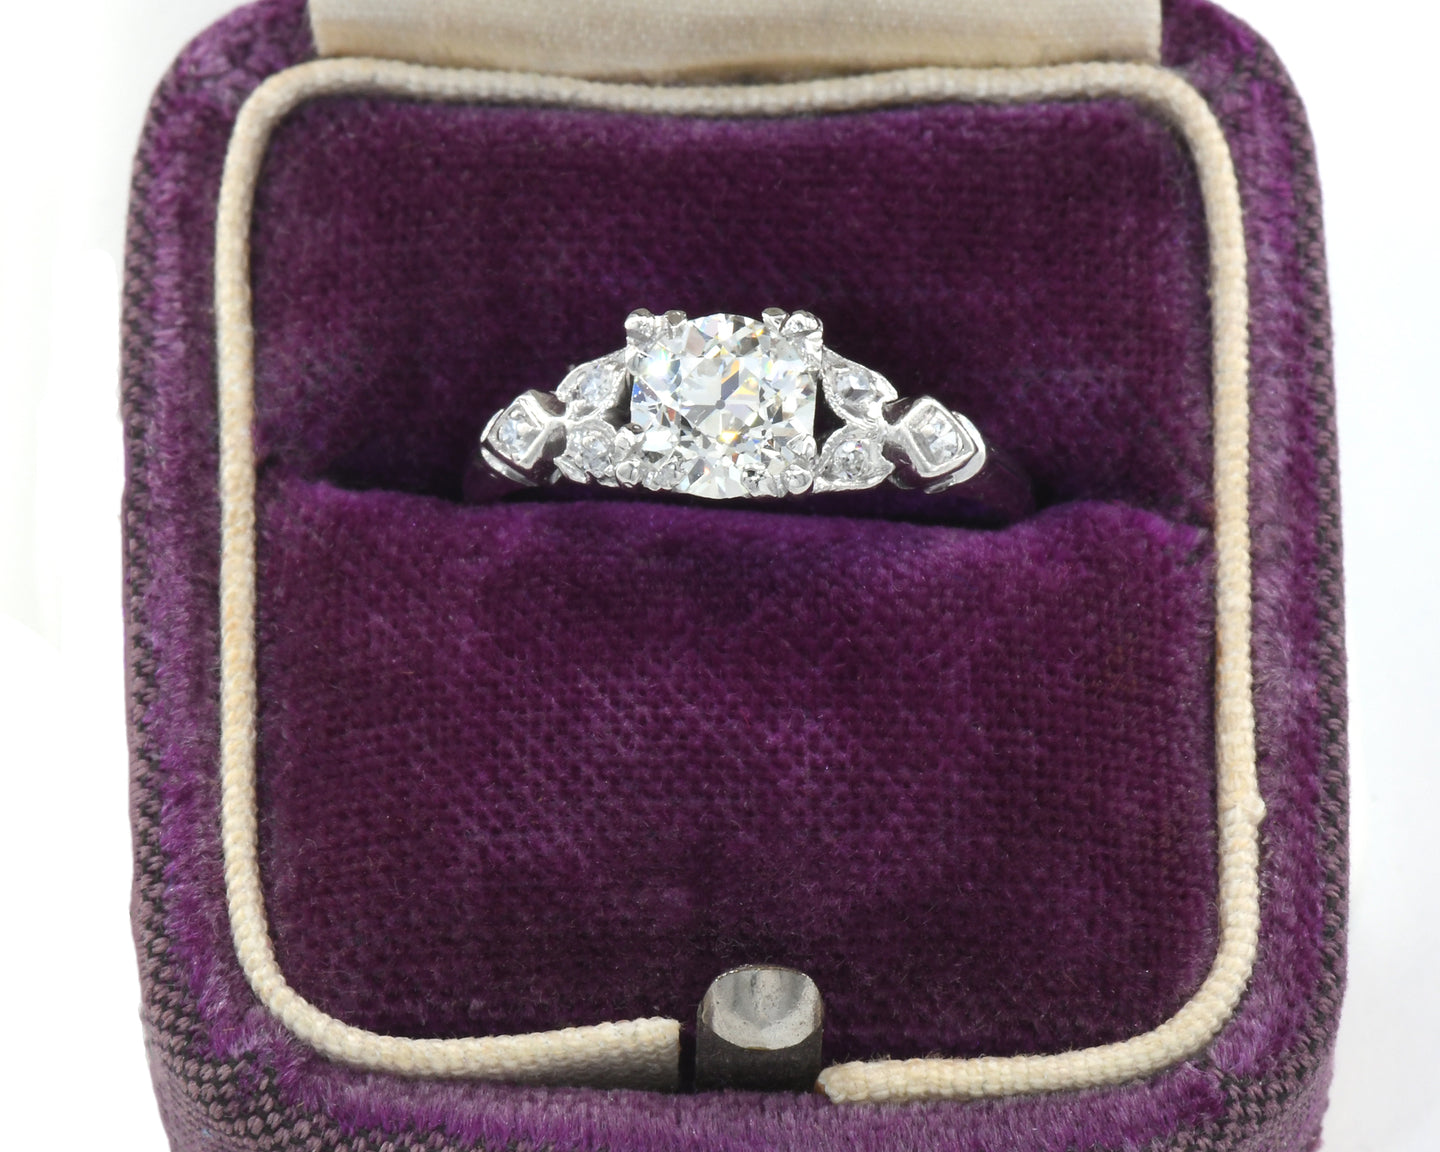 Vintage Platinum Engagement Ring Set With Old European and Single Cut Diamonds